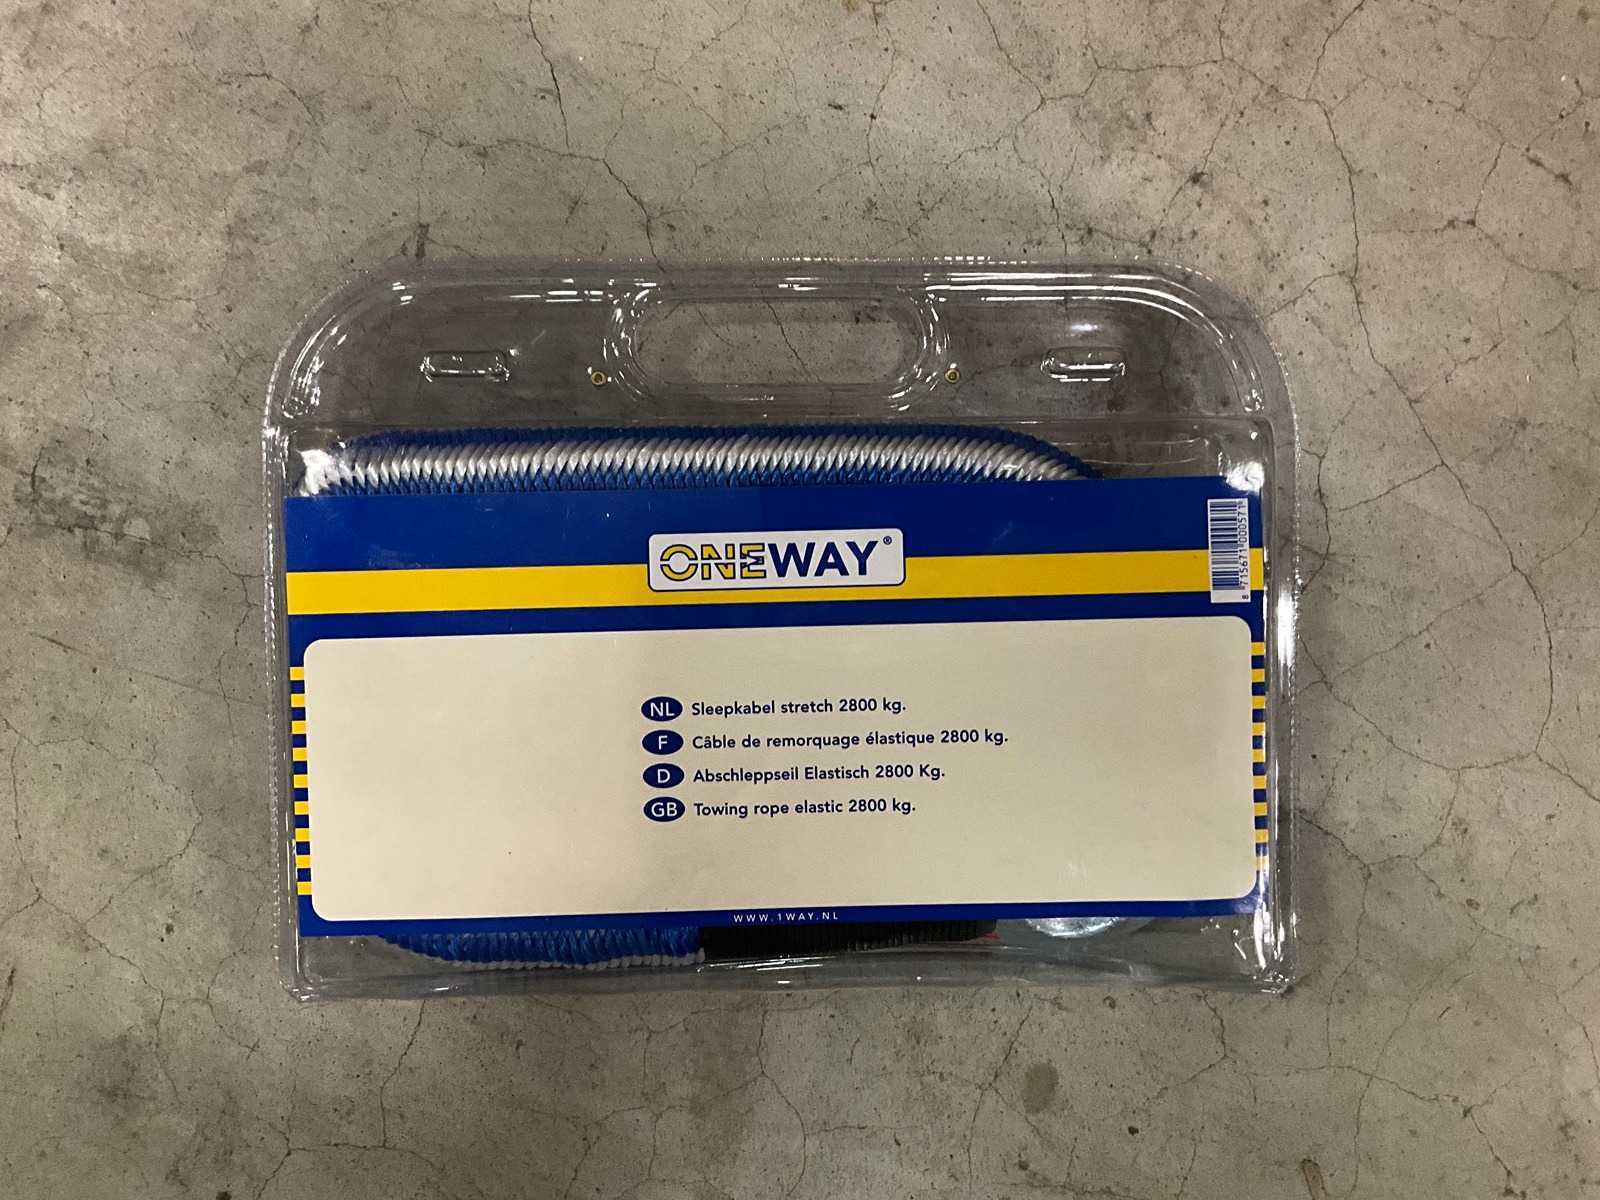 One Way - Stretch-Abschleppseil 2800KG in Blisterverpackung (10x)